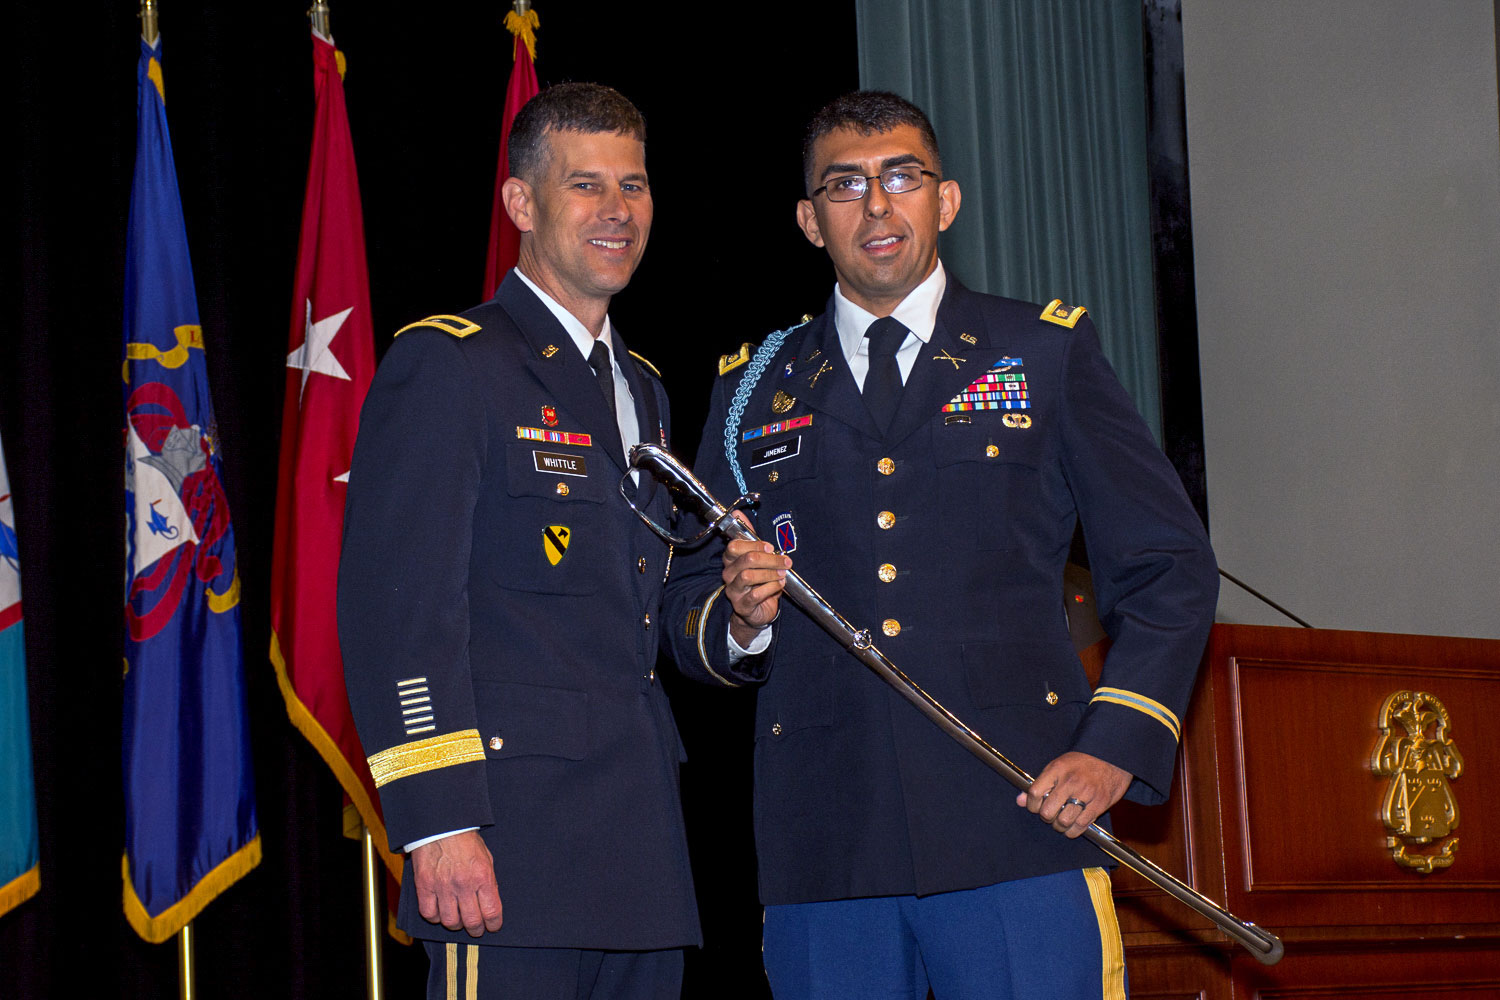 Photo of Major Moises Jimenez receiving the Colonel Thom Felts Leadership Award, an Army saber, from graduation guest speaker Brig. Gen. Robert F. Whittle, Jr., commandant of the U.S. Army Engineer School at Fort Leonard Wood, during the SAMS graduation ceremony May 23, 2019.